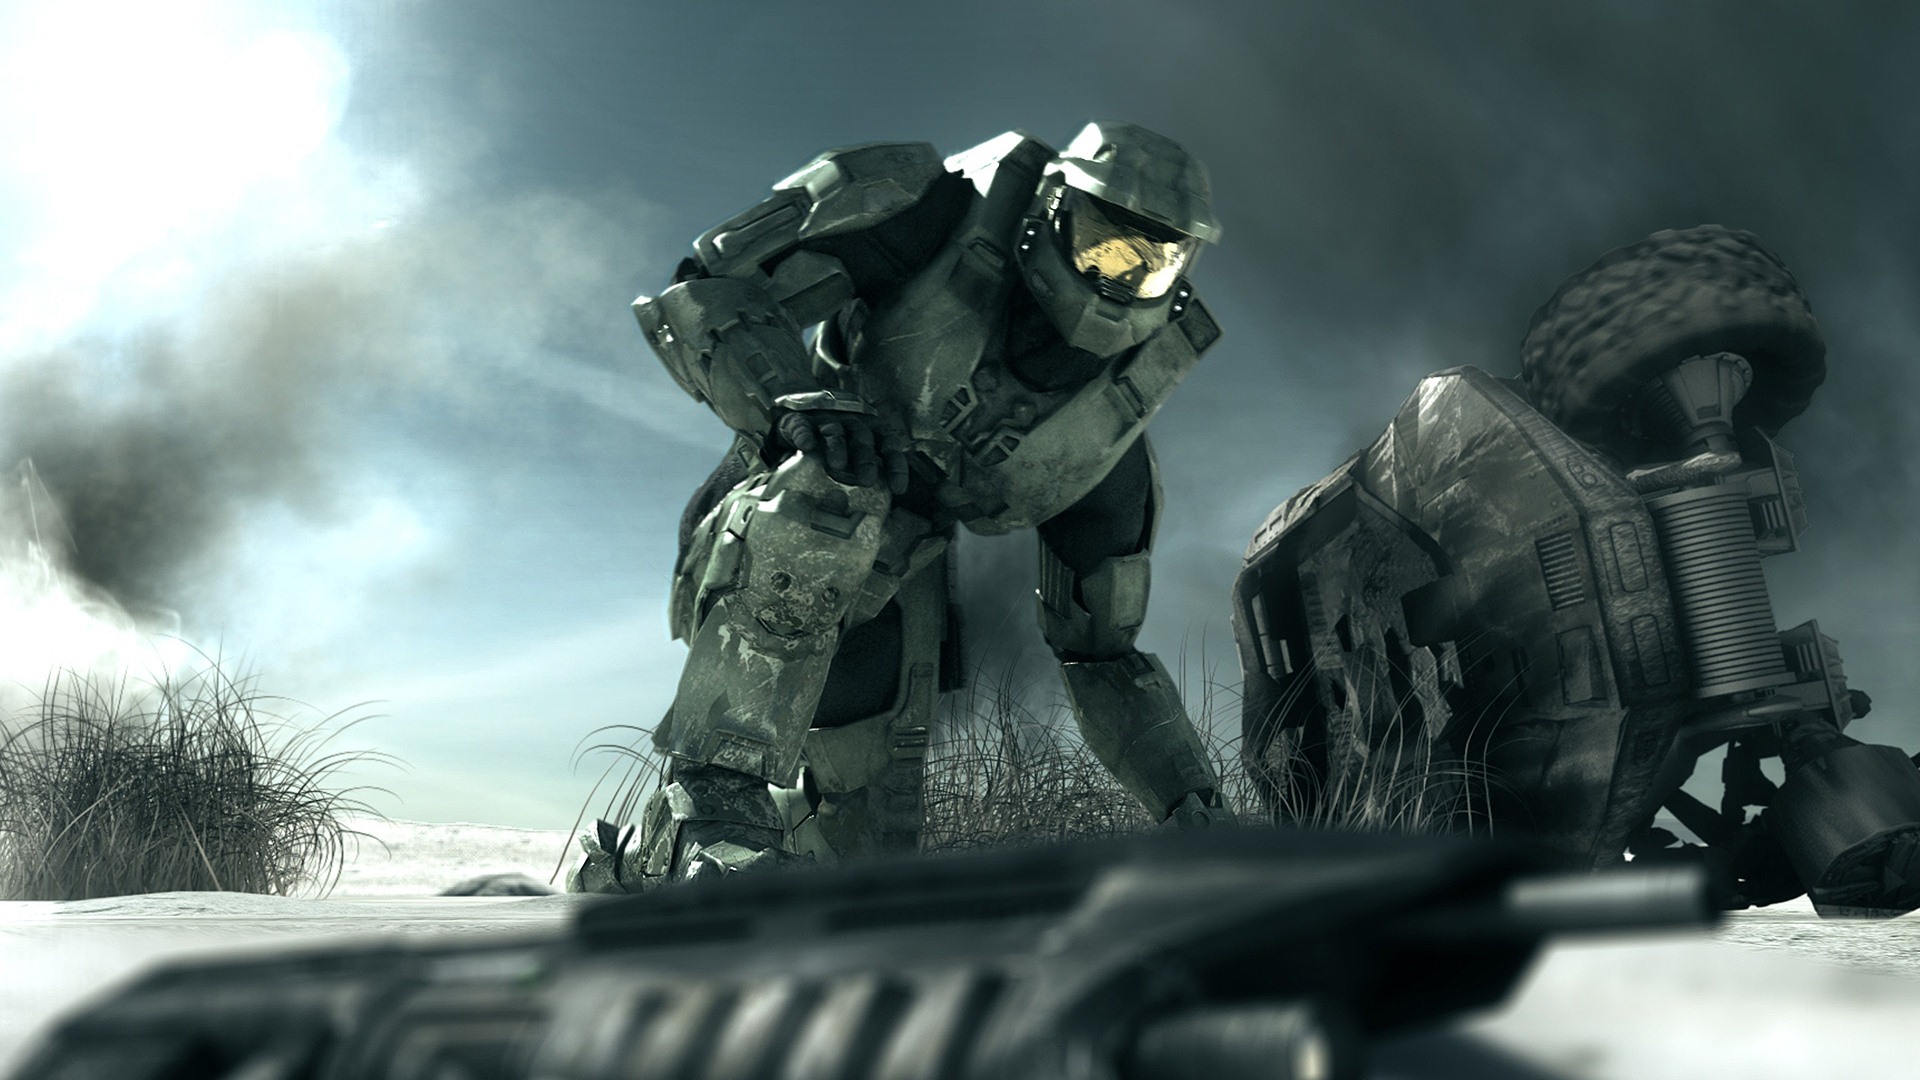 Halo game HD wallpapers #21 - 1920x1080